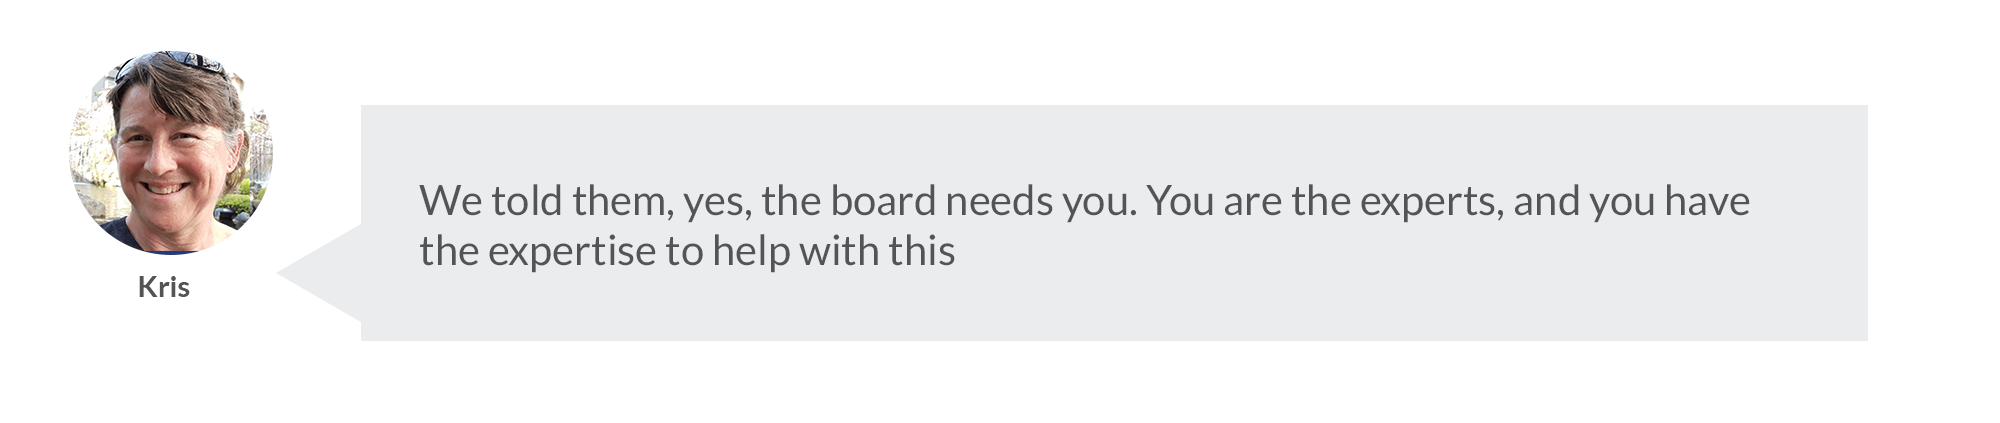 We told them, yes, the board needs you. You are the experts, and you have the expertise to help with this. 